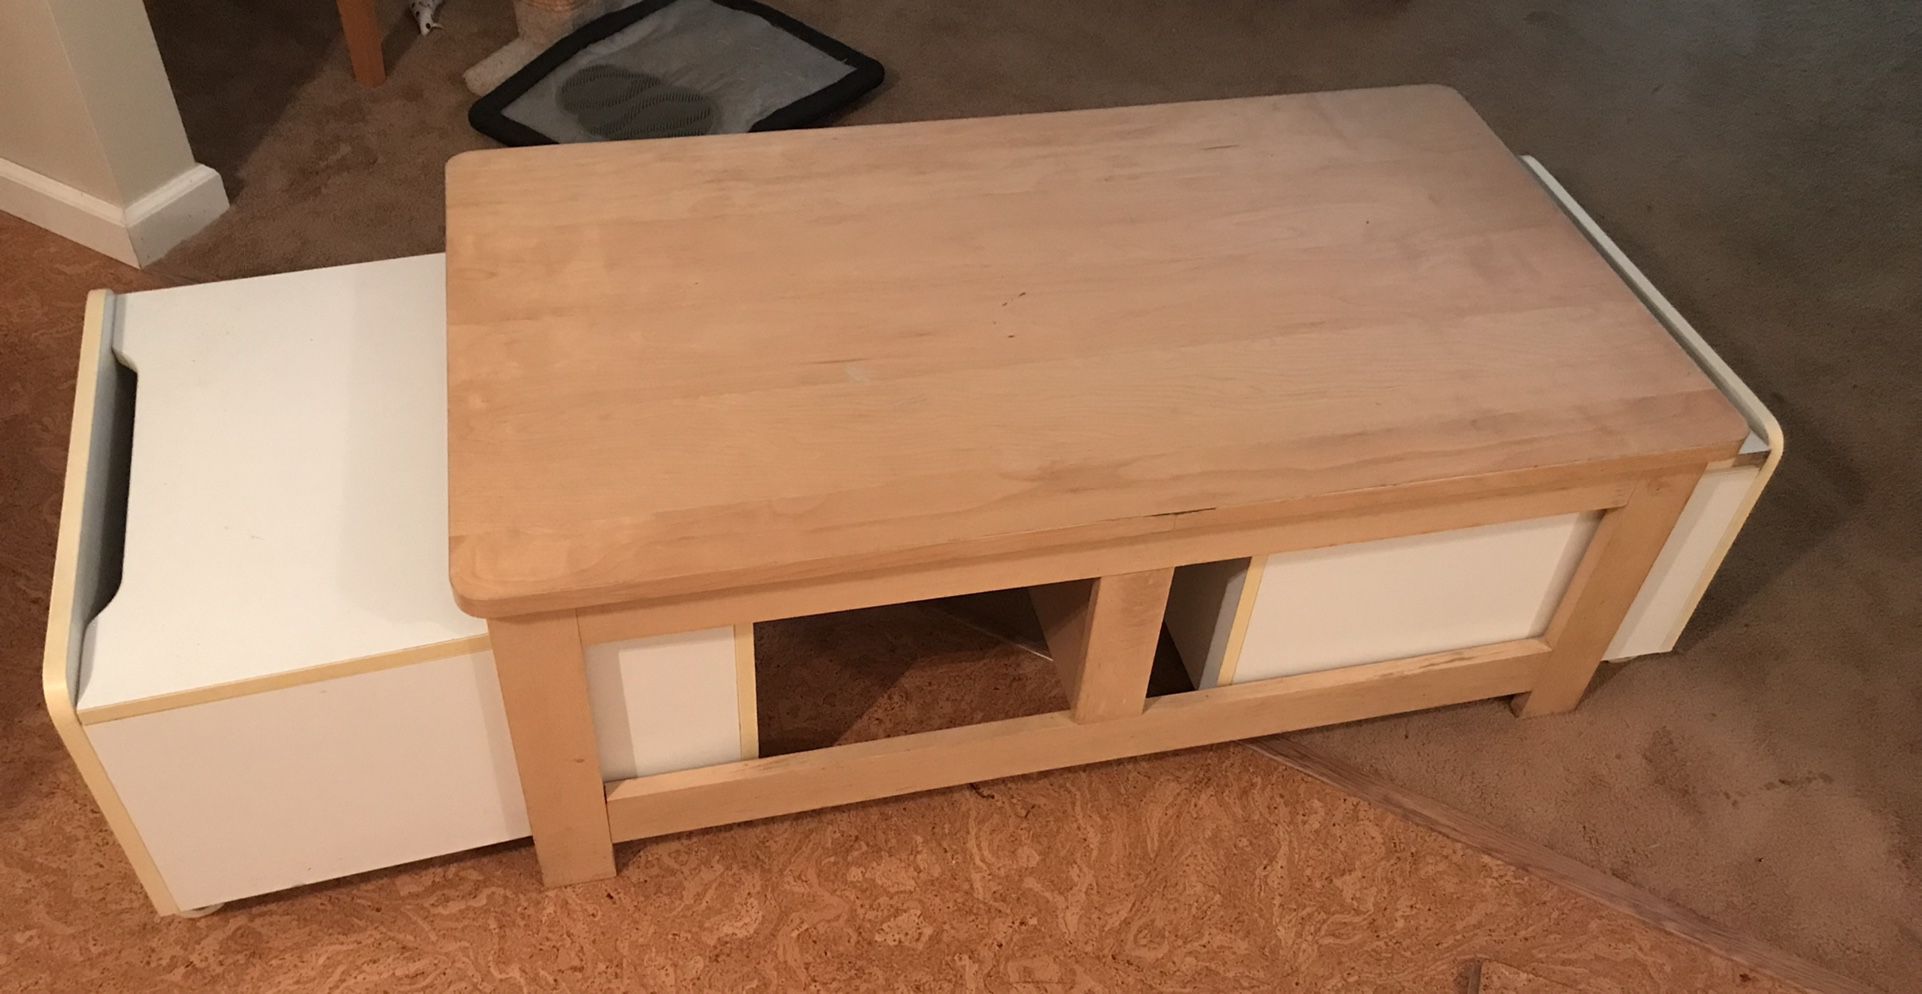 Kids Wood Coffee Table, Storage Bench And Extra Seating!!